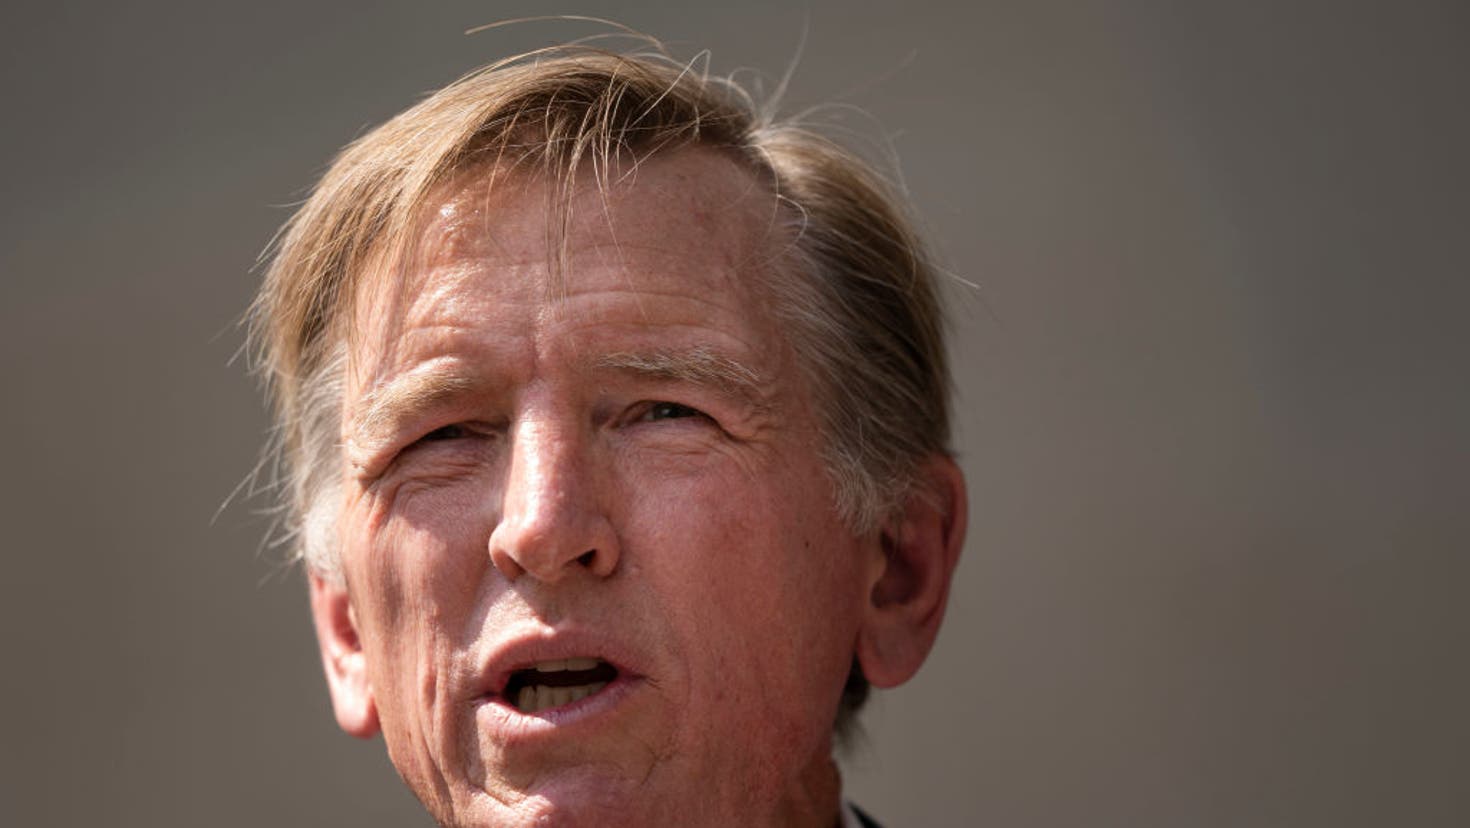 Rep. Paul Gosar, R-Ariz., speaks during a news conference outside the U.S. Department of Justice on July 27, 2021 in Washington, DC. (Photo by Drew Angerer/Getty Images)